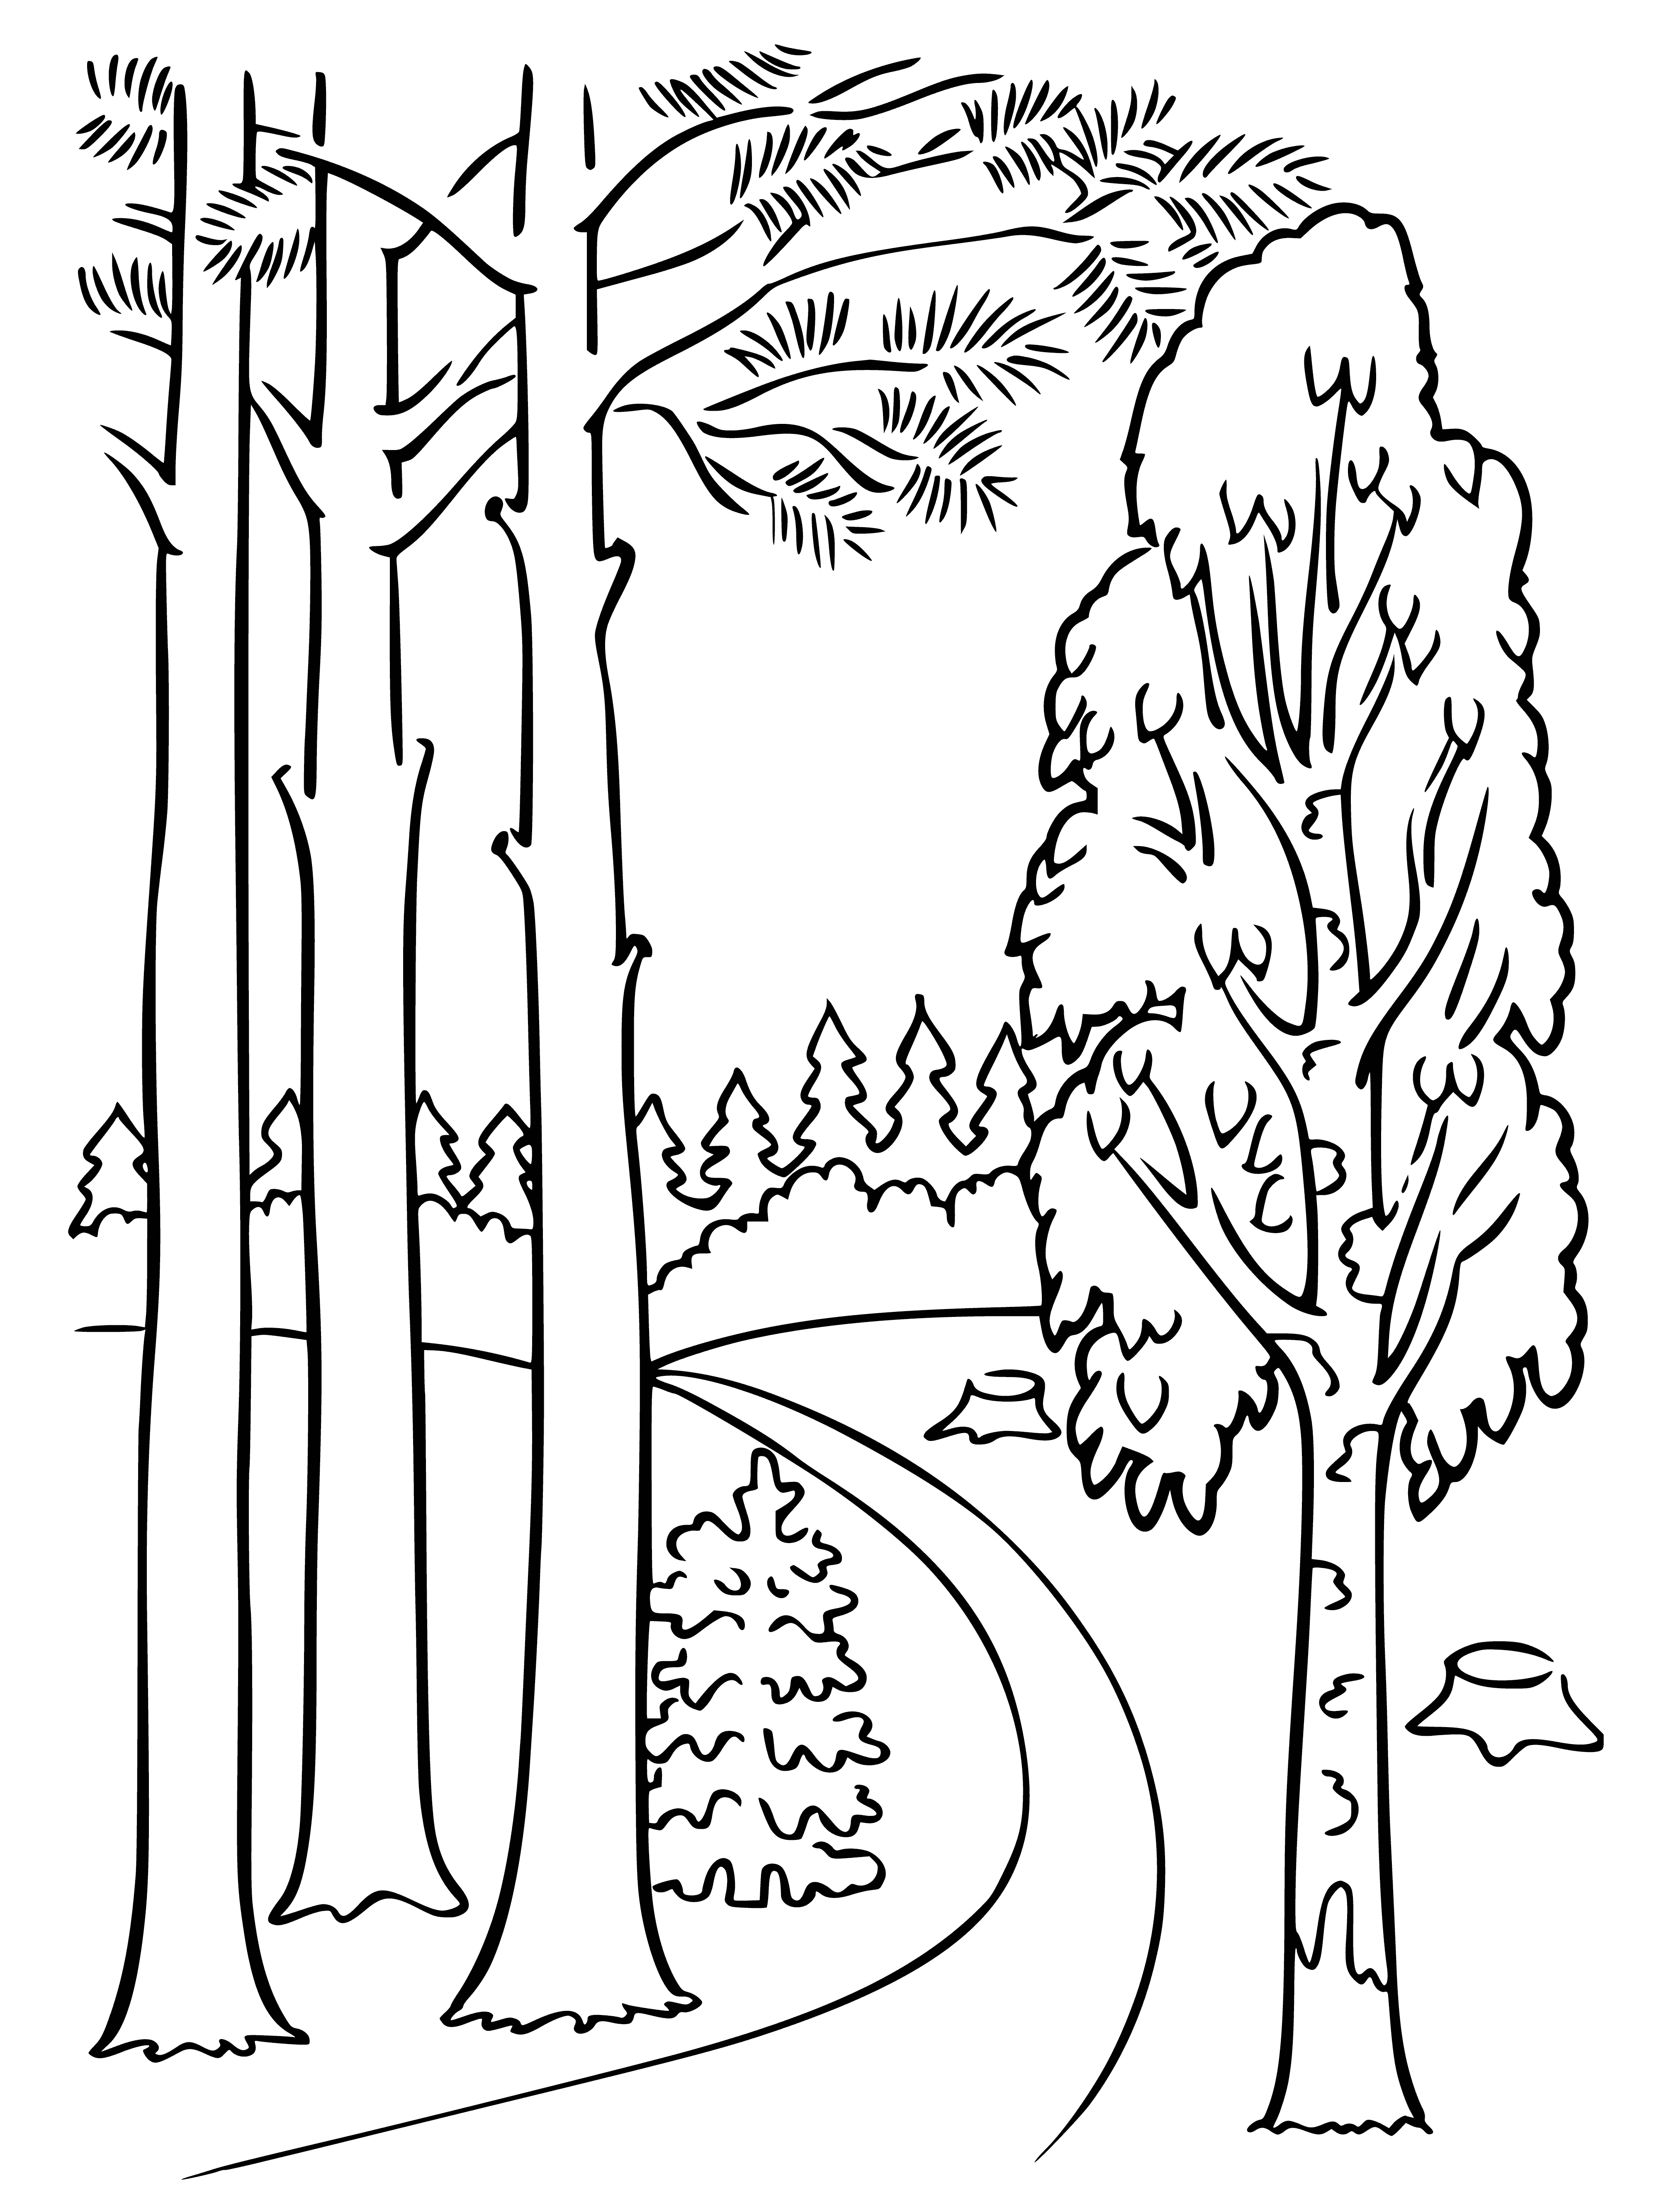 coloring page: Path of dirt & rocks in a forest of tall trees & greenery. Peaceful & empty.